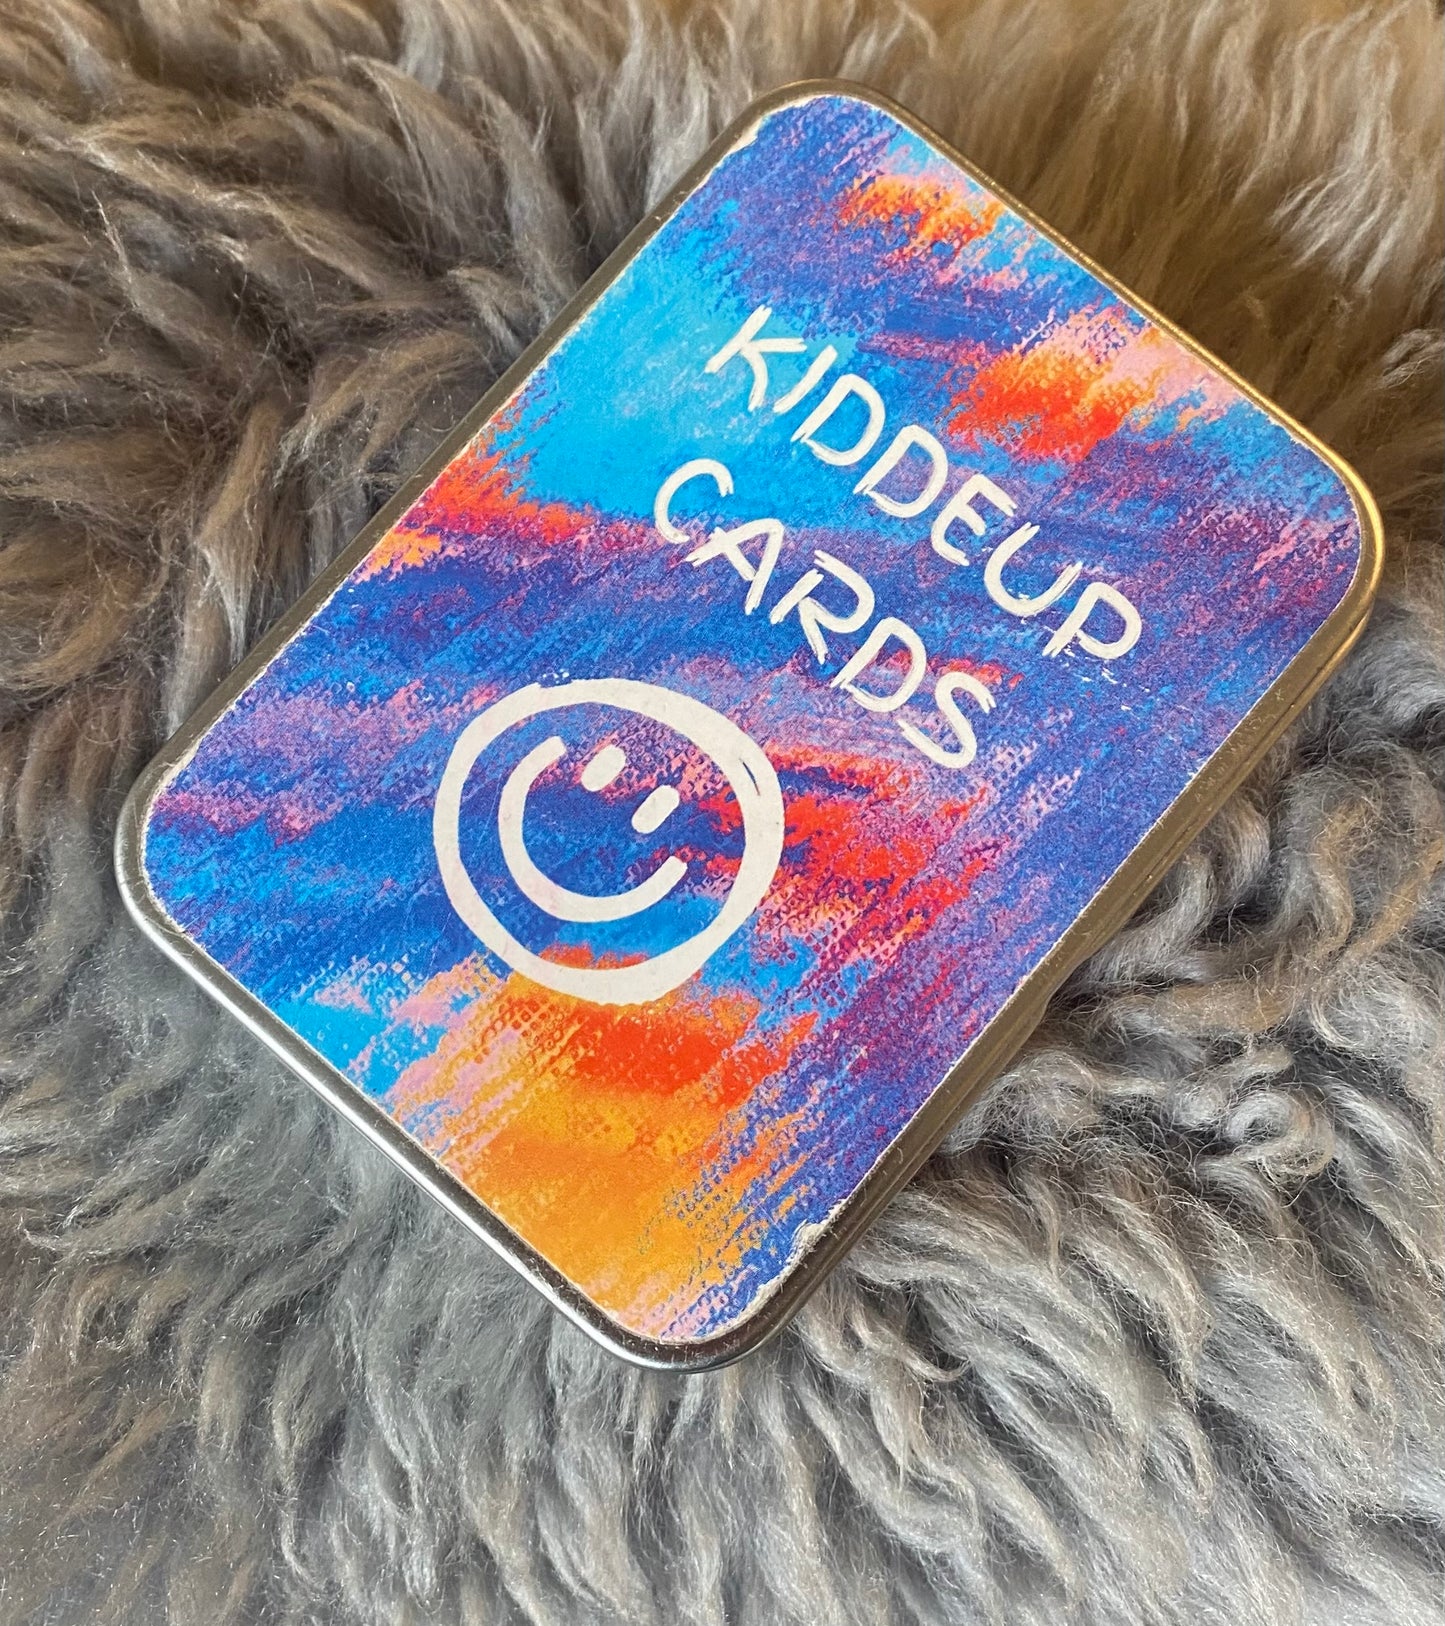 Kiddeup Card Deck and Case - PRE-ORDER NOW! Support Us on Kickstarter to Get Your Cards